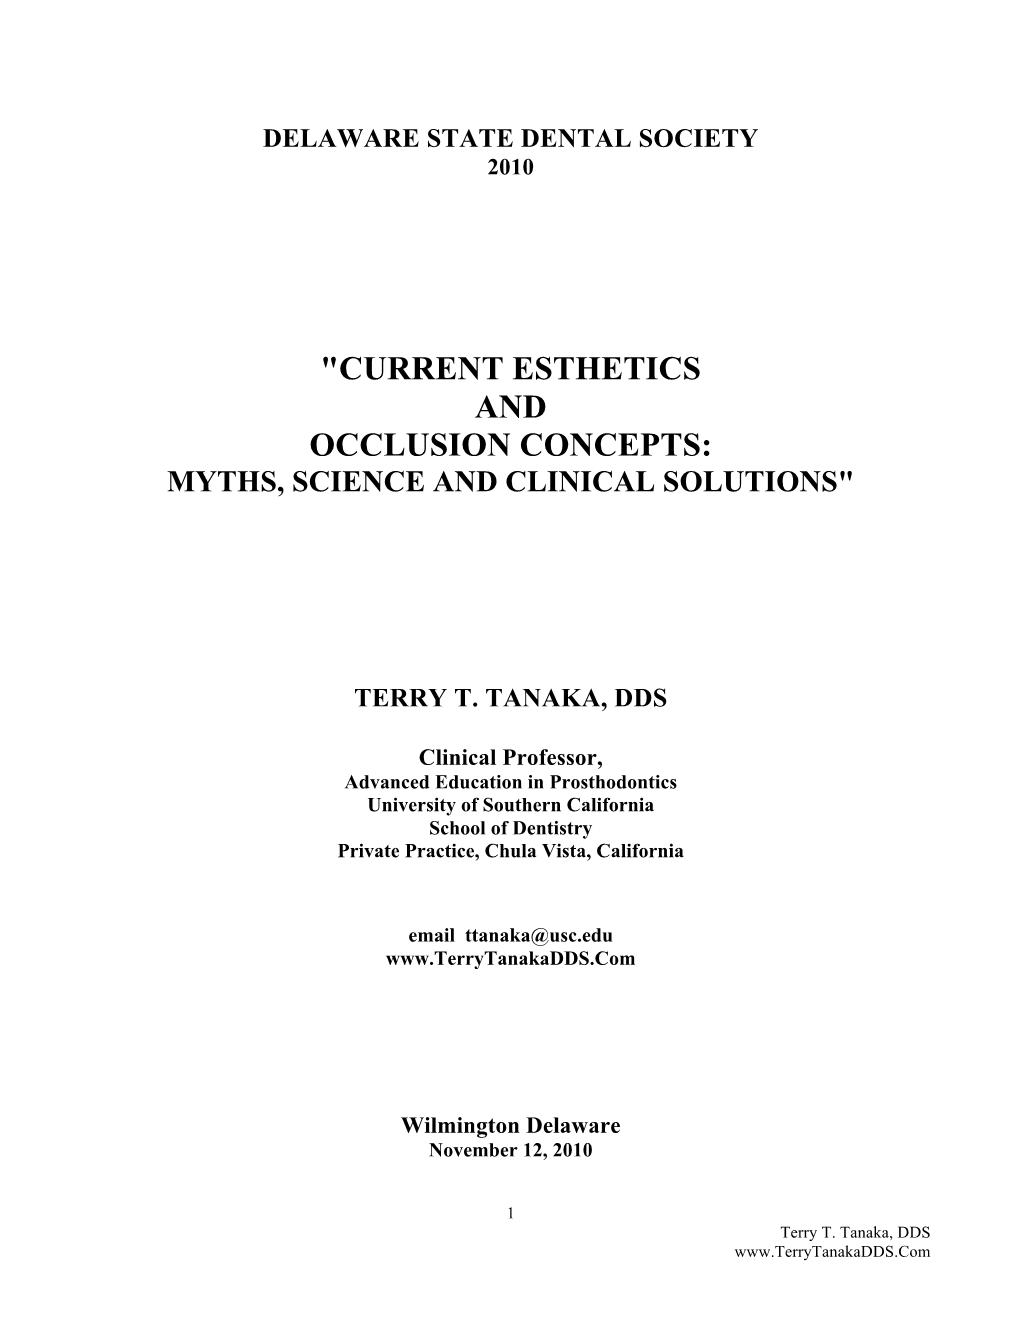 "Current Esthetics and Occlusion Concepts: Myths, Science and Clinical Solutions"